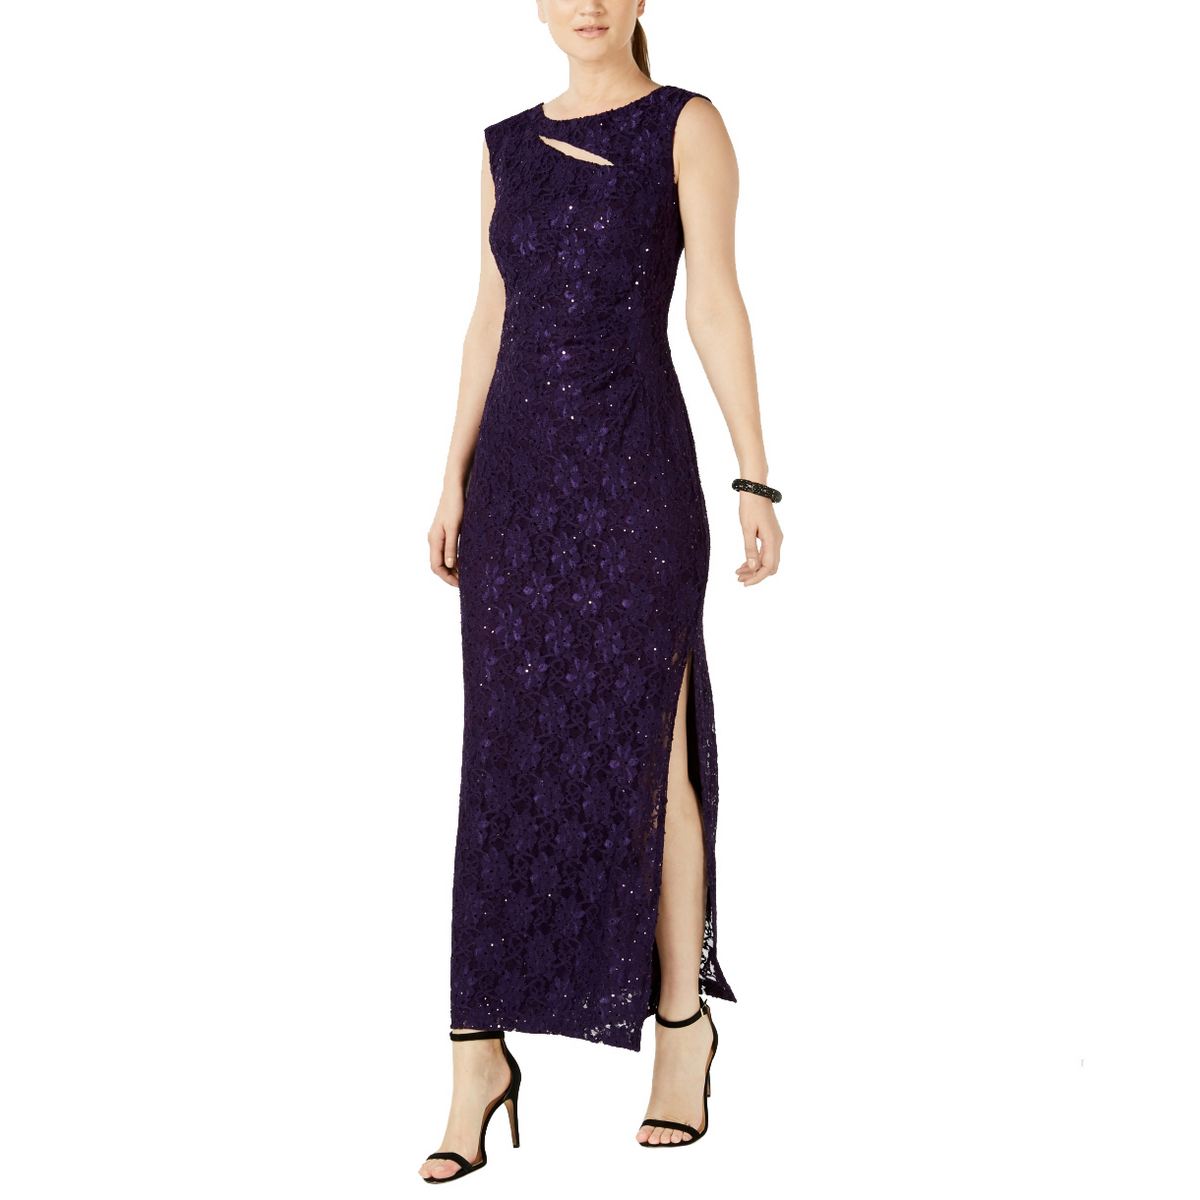 CONNECTED APPAREL NEW Women's Eggplant Cutout Sequined Lace Gown Dress ...